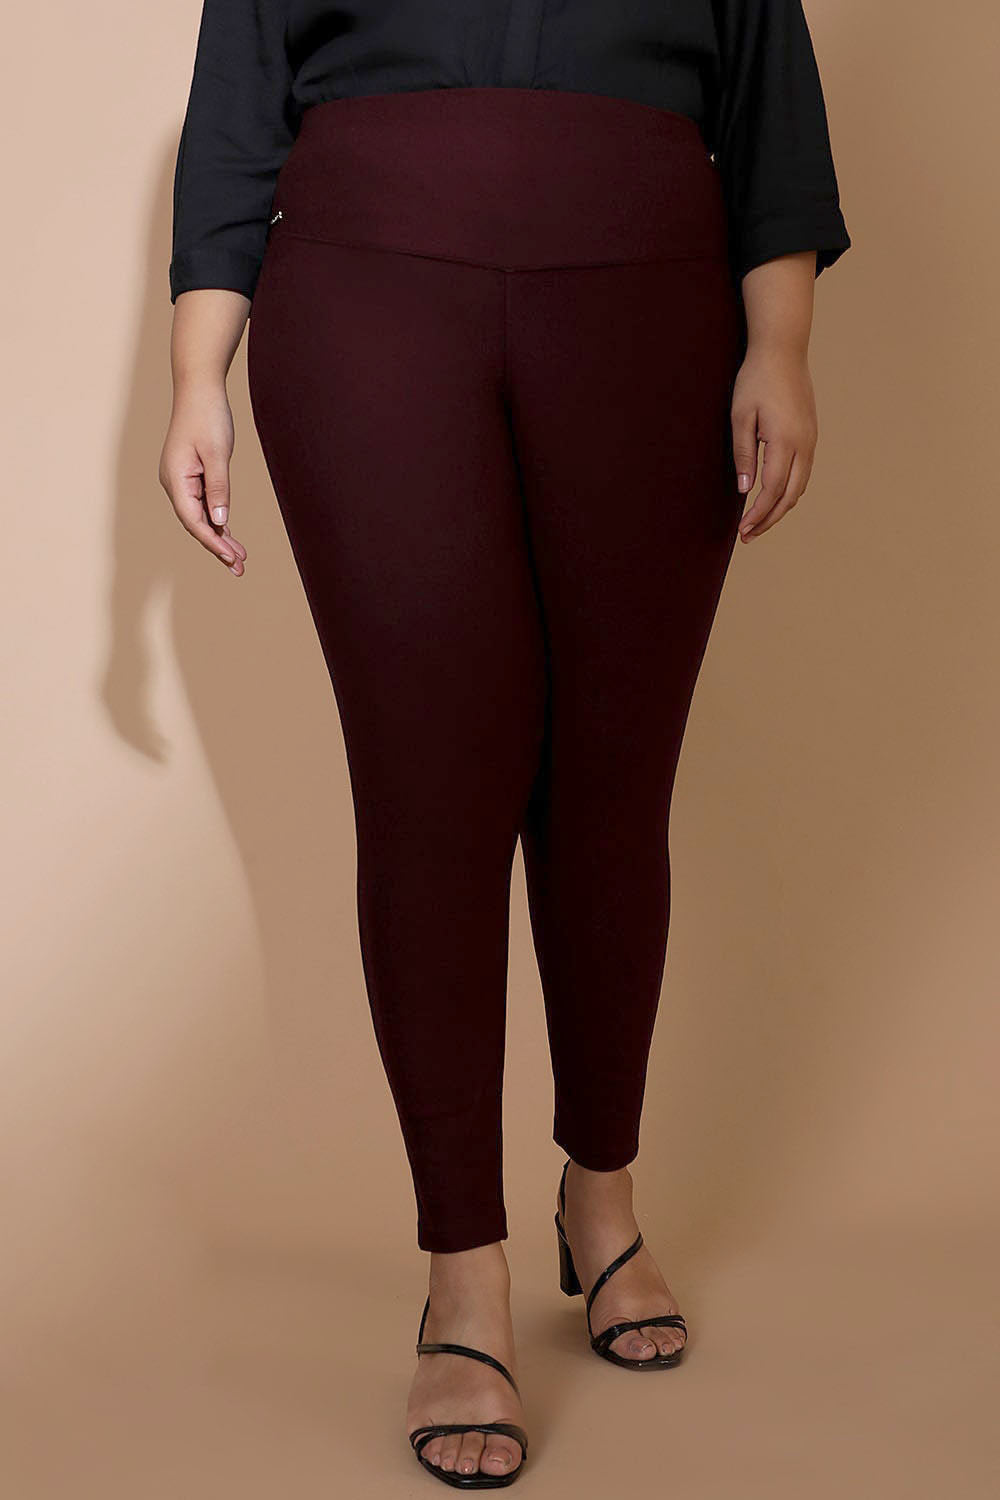 Upgrade Your Workout Gear With Plus Size Gym Wear Pants For Women